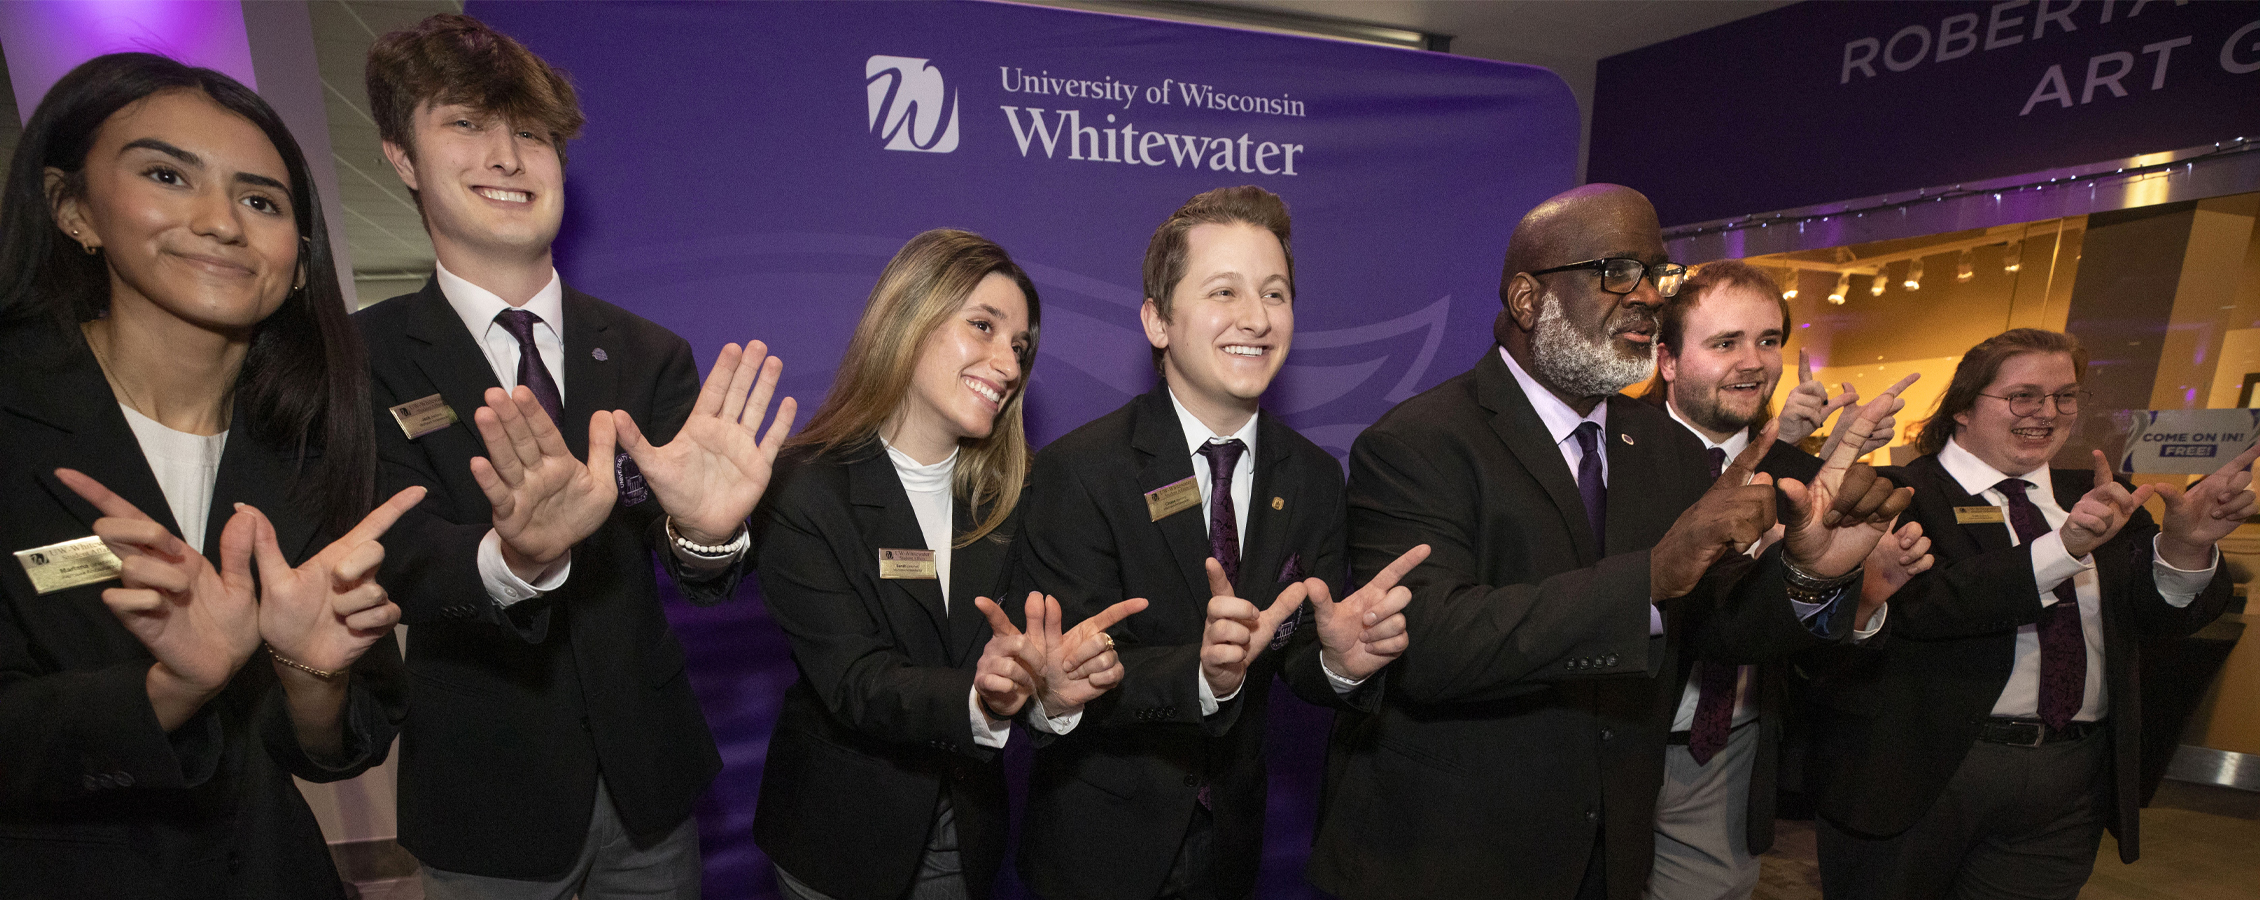 Chancellor King stands with students from Whitewater Student Government.